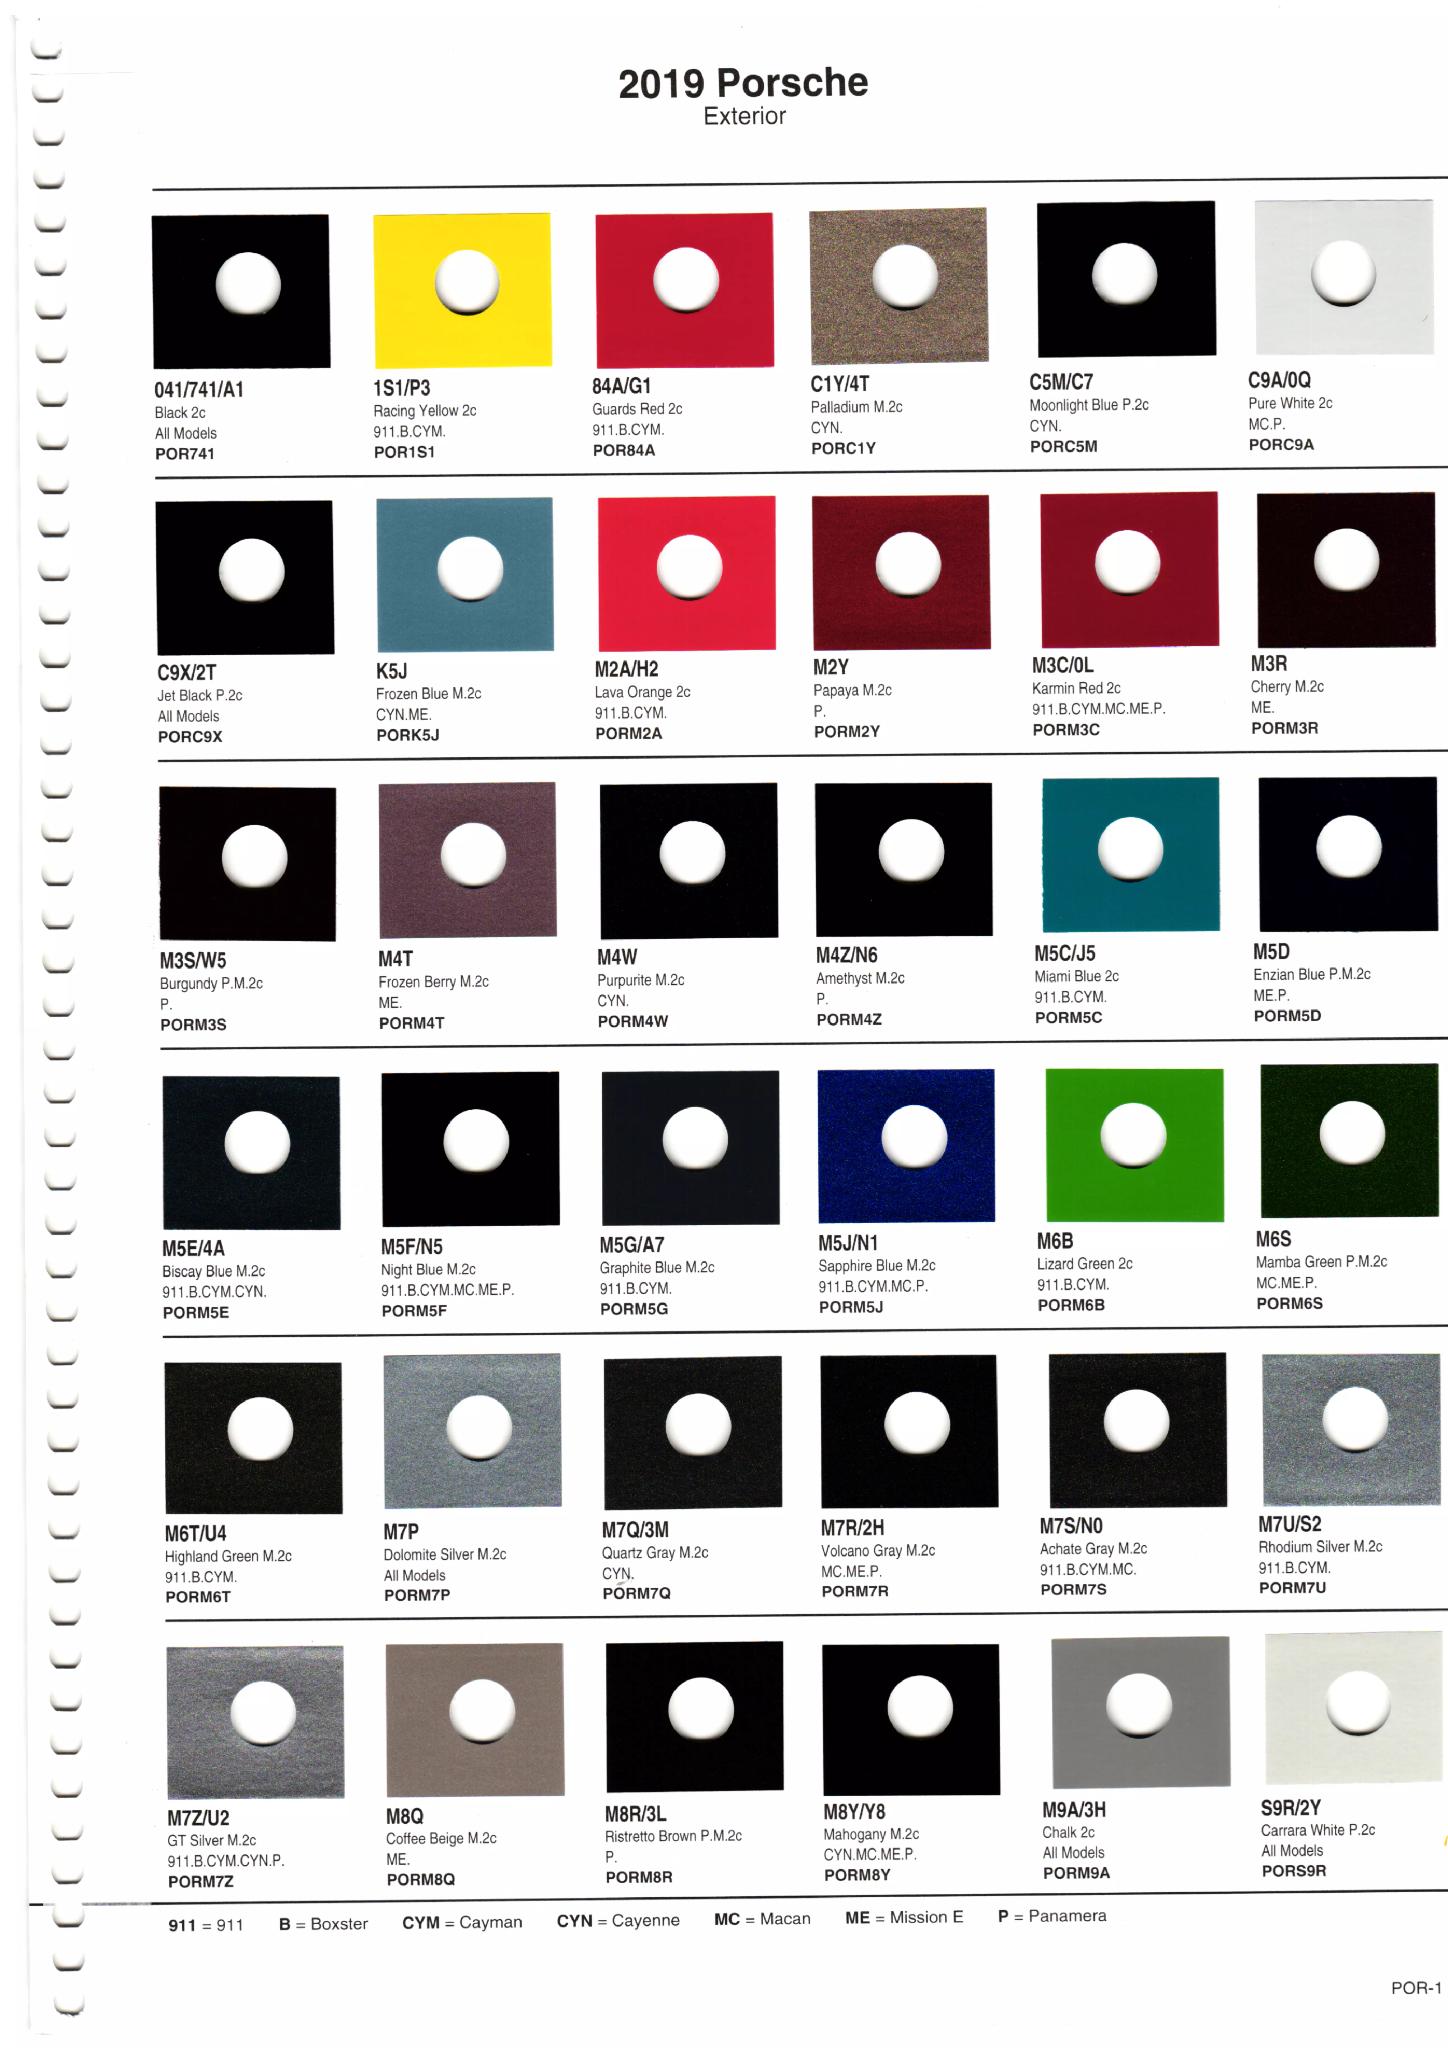 Exterior paint codes and their colors used on all models in 2019